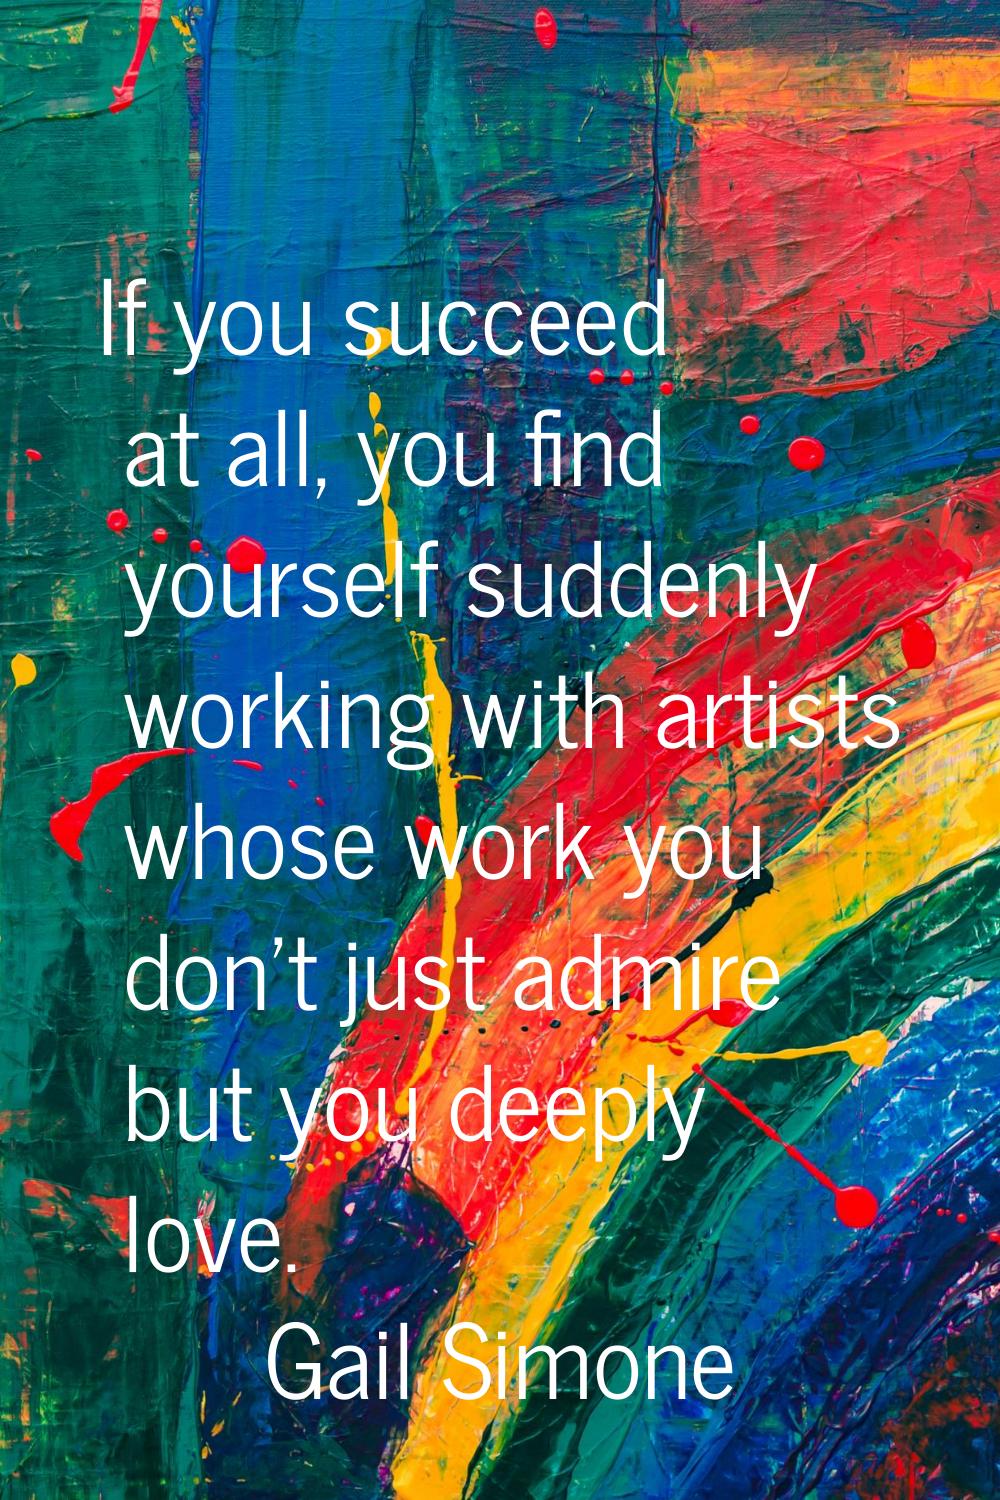 If you succeed at all, you find yourself suddenly working with artists whose work you don't just ad